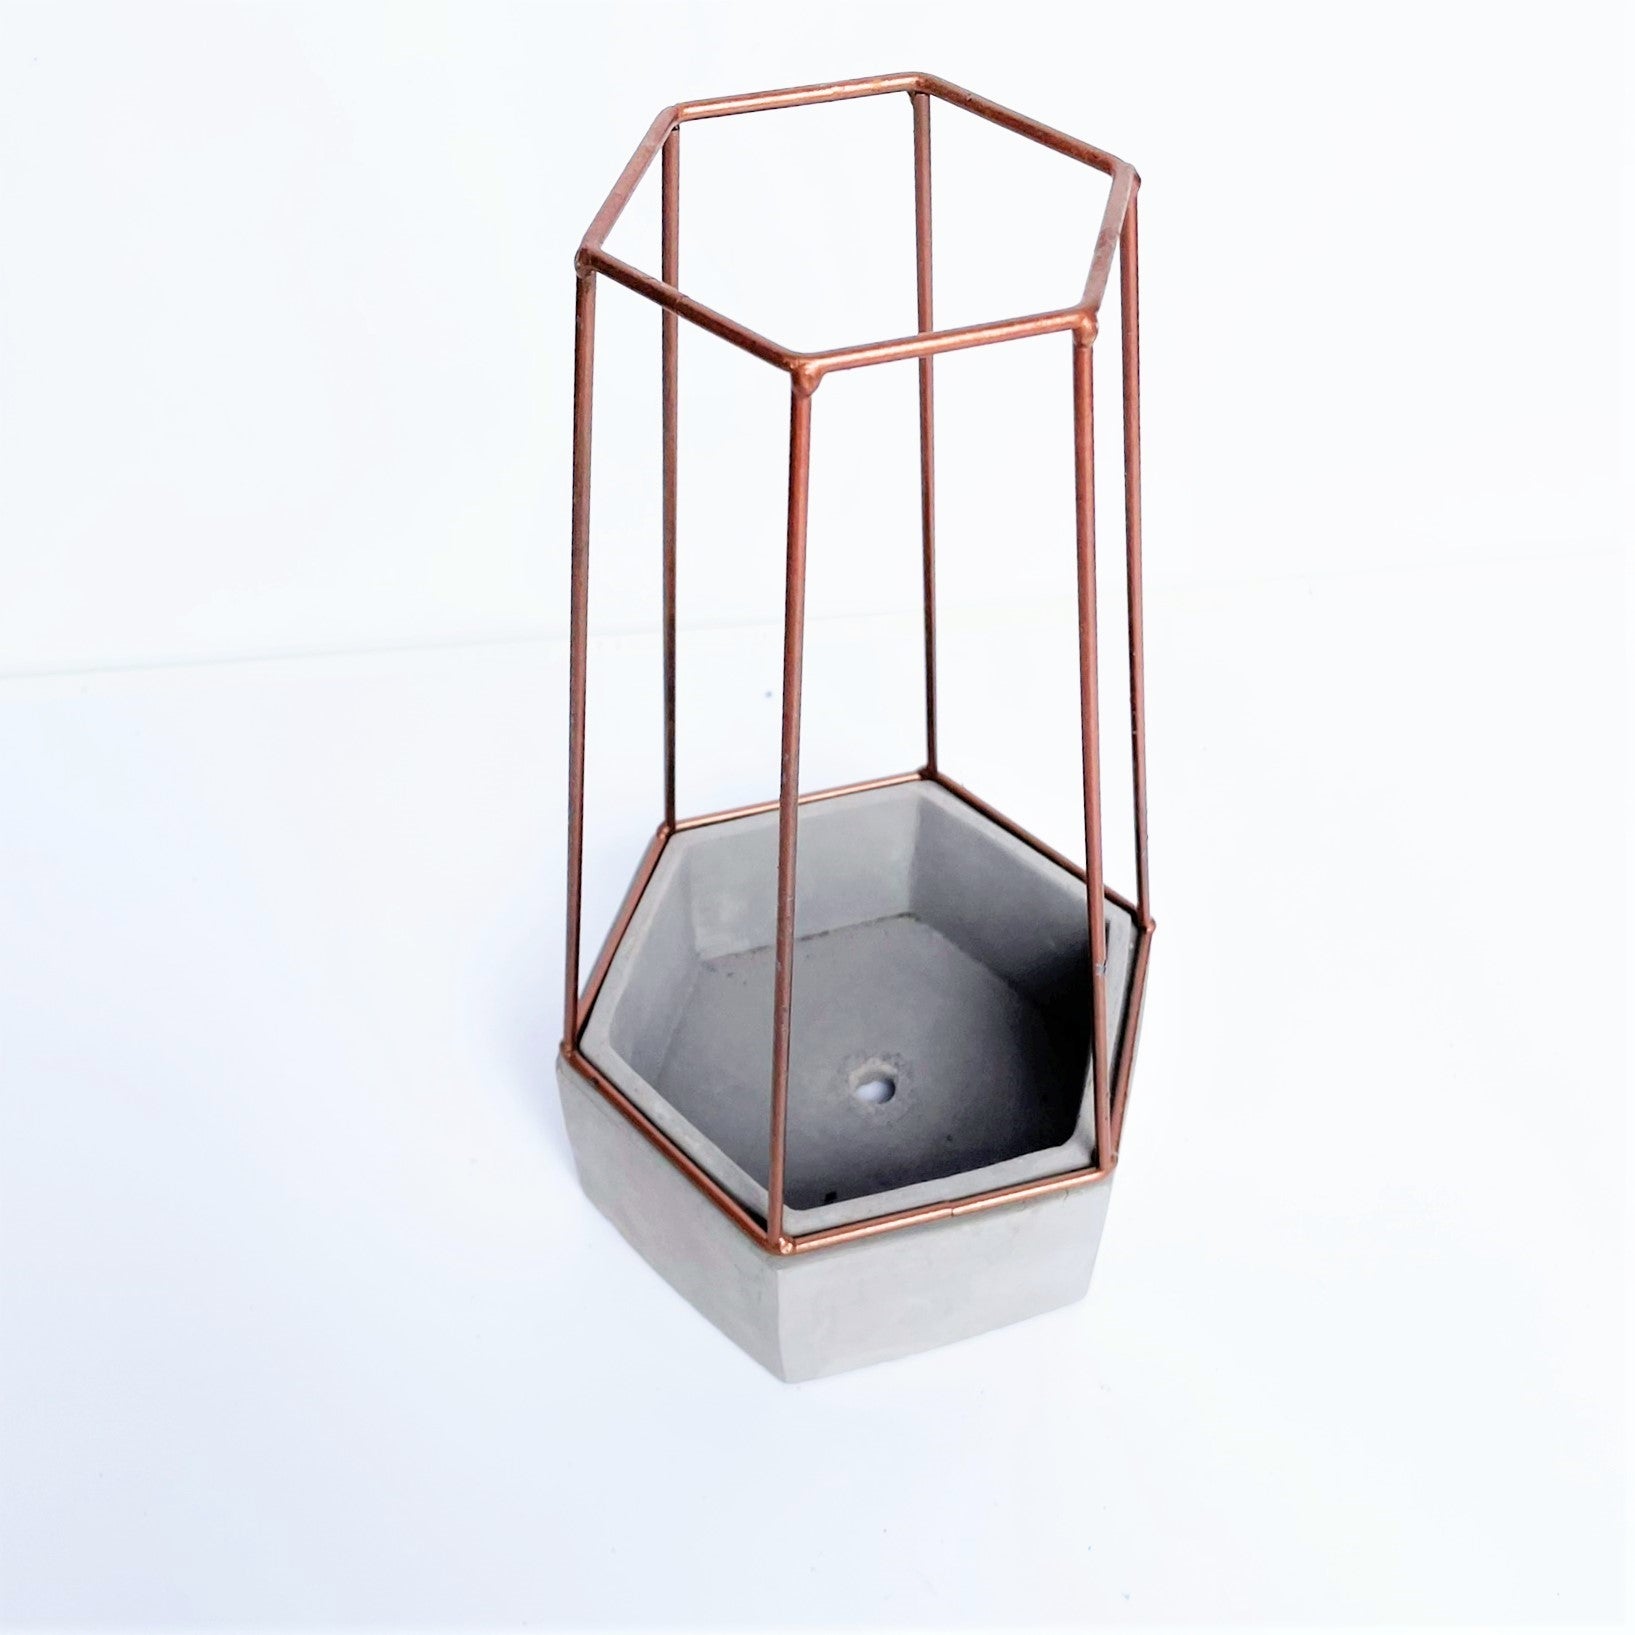 Hexagonal Cement Planter with Metal Cage